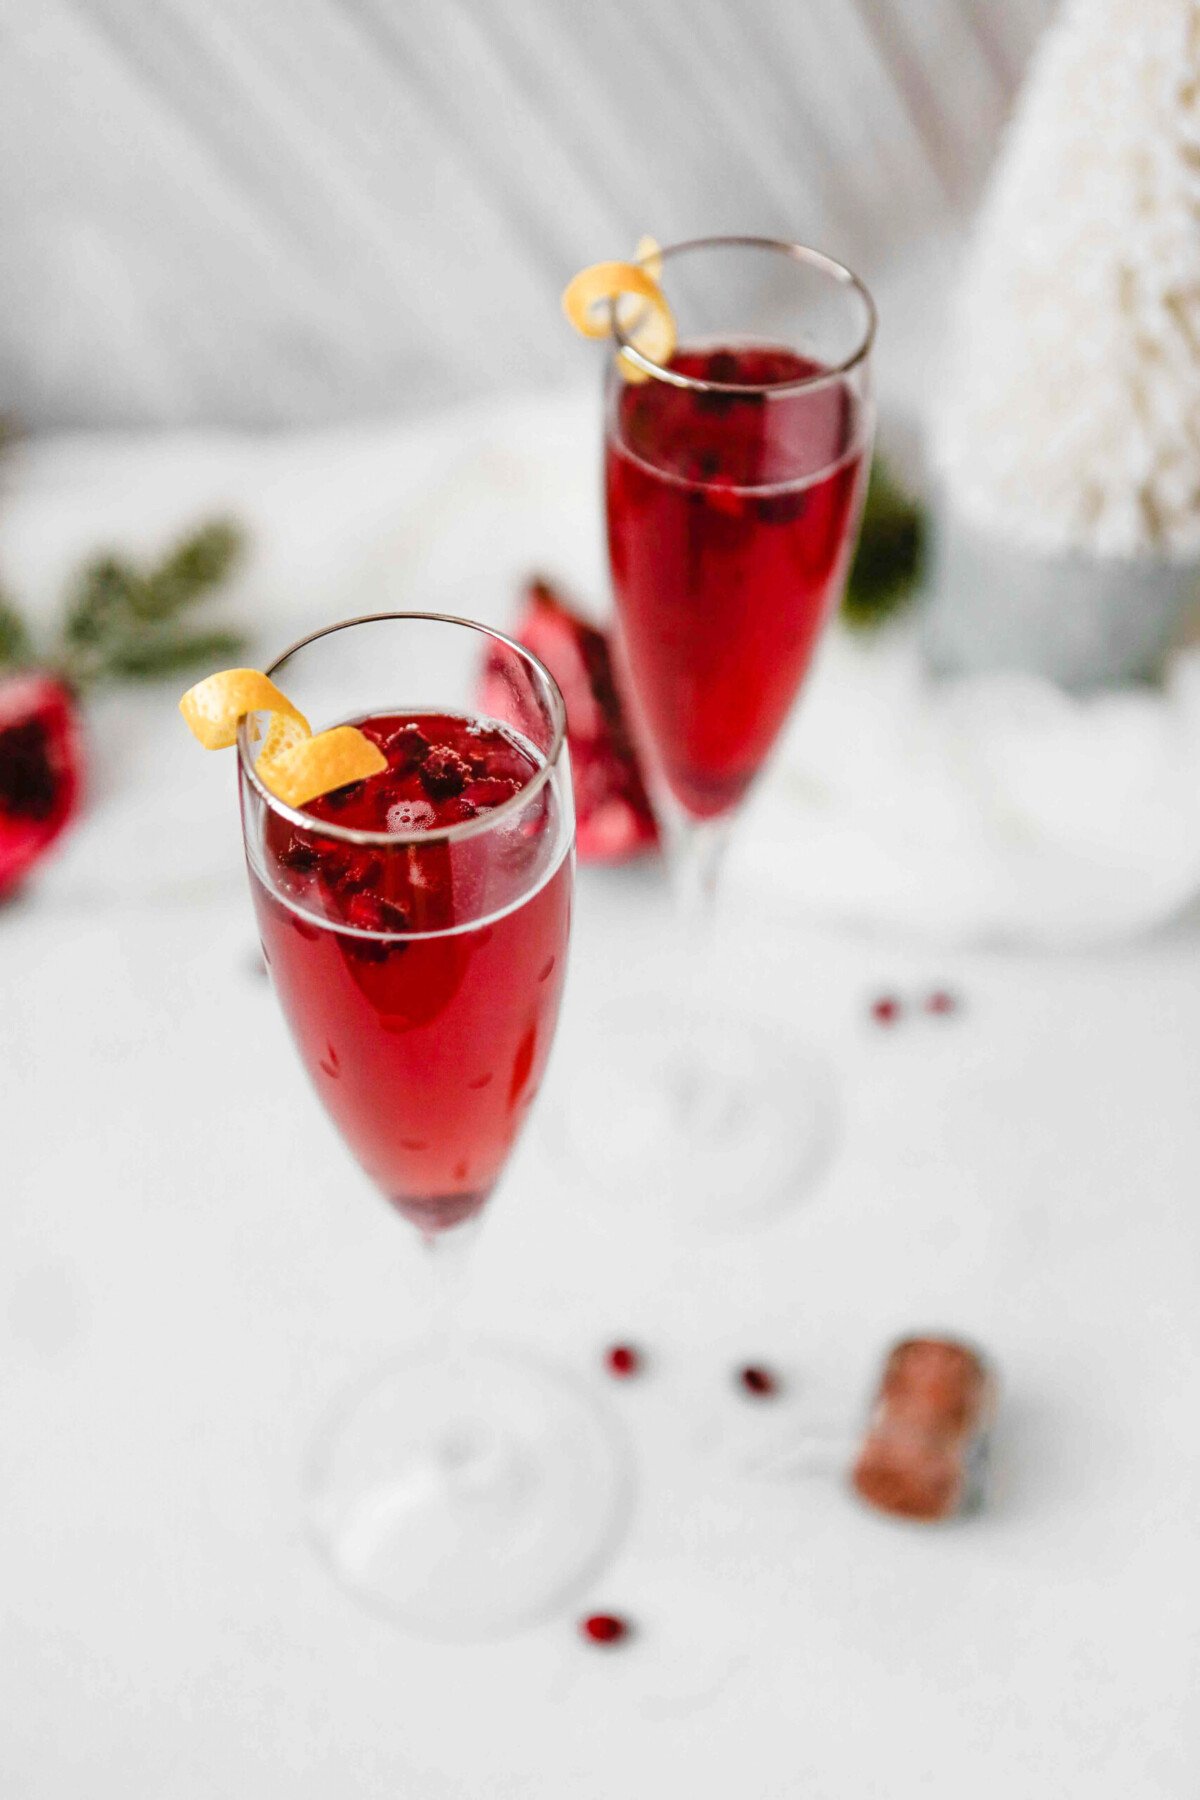 Photograph of pomegranate kir royale cocktail in two flutes, cheersing